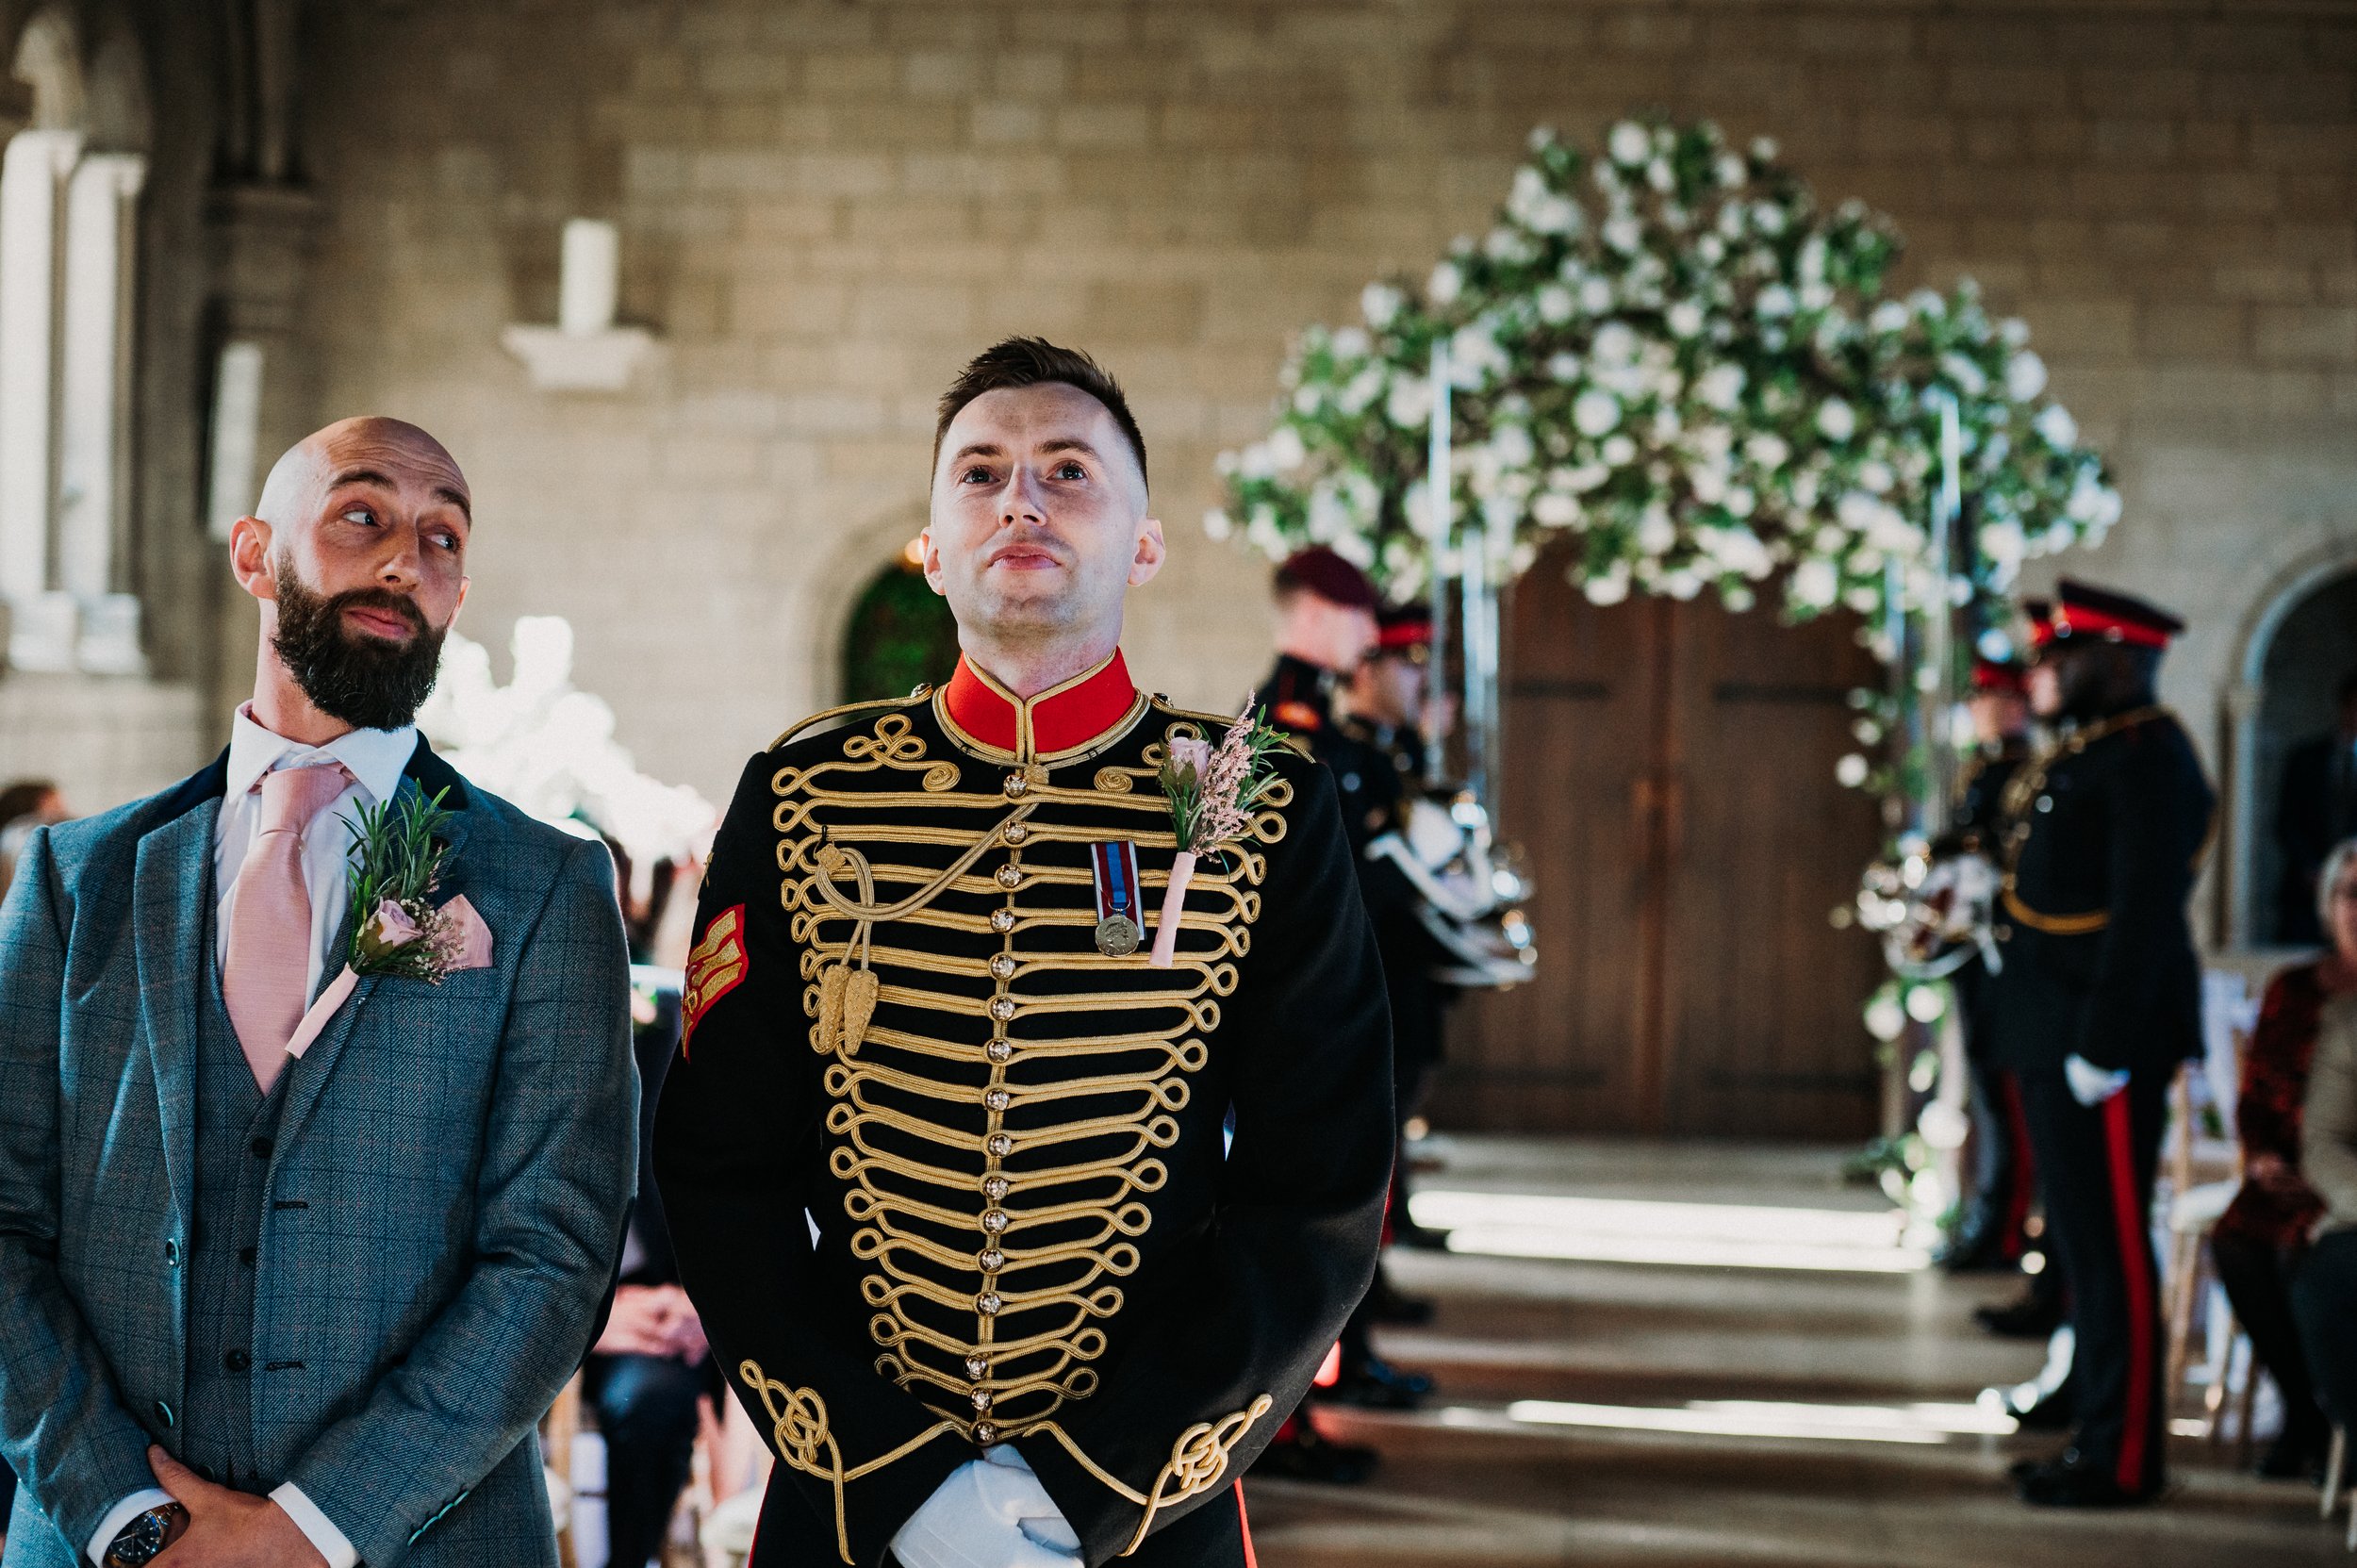 A nervous looking groom waits patiently for his bride to come into the ceremony room at Sneaton Castle, Whitby.